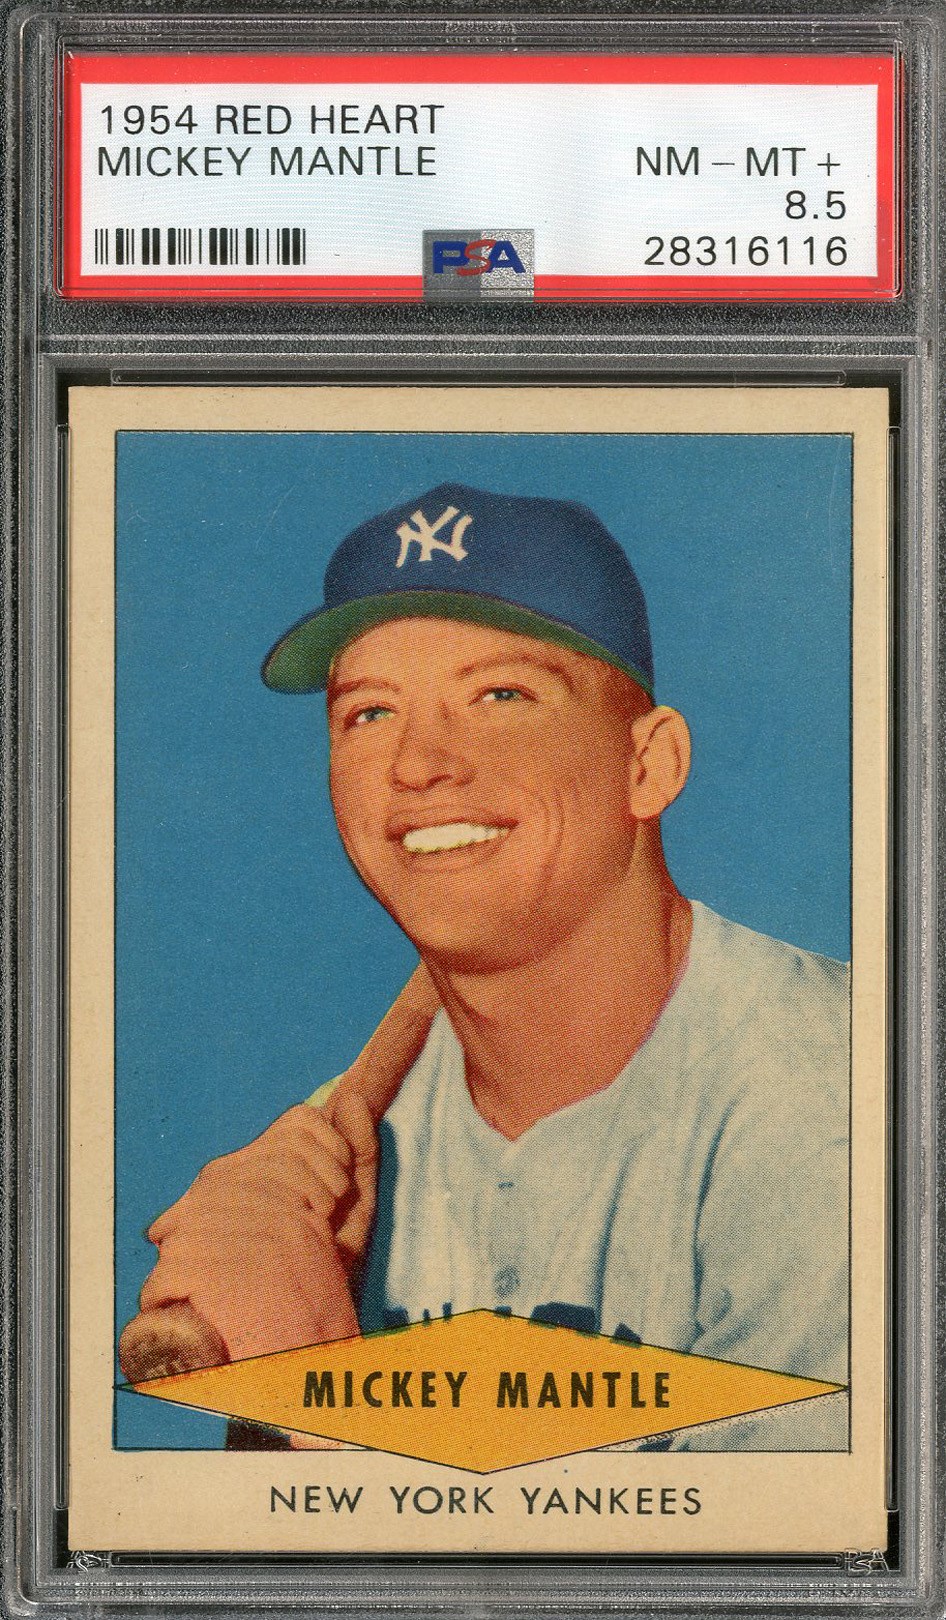 1954 Red Heart Mickey Mantle - PSA NM-MT+ 8.5